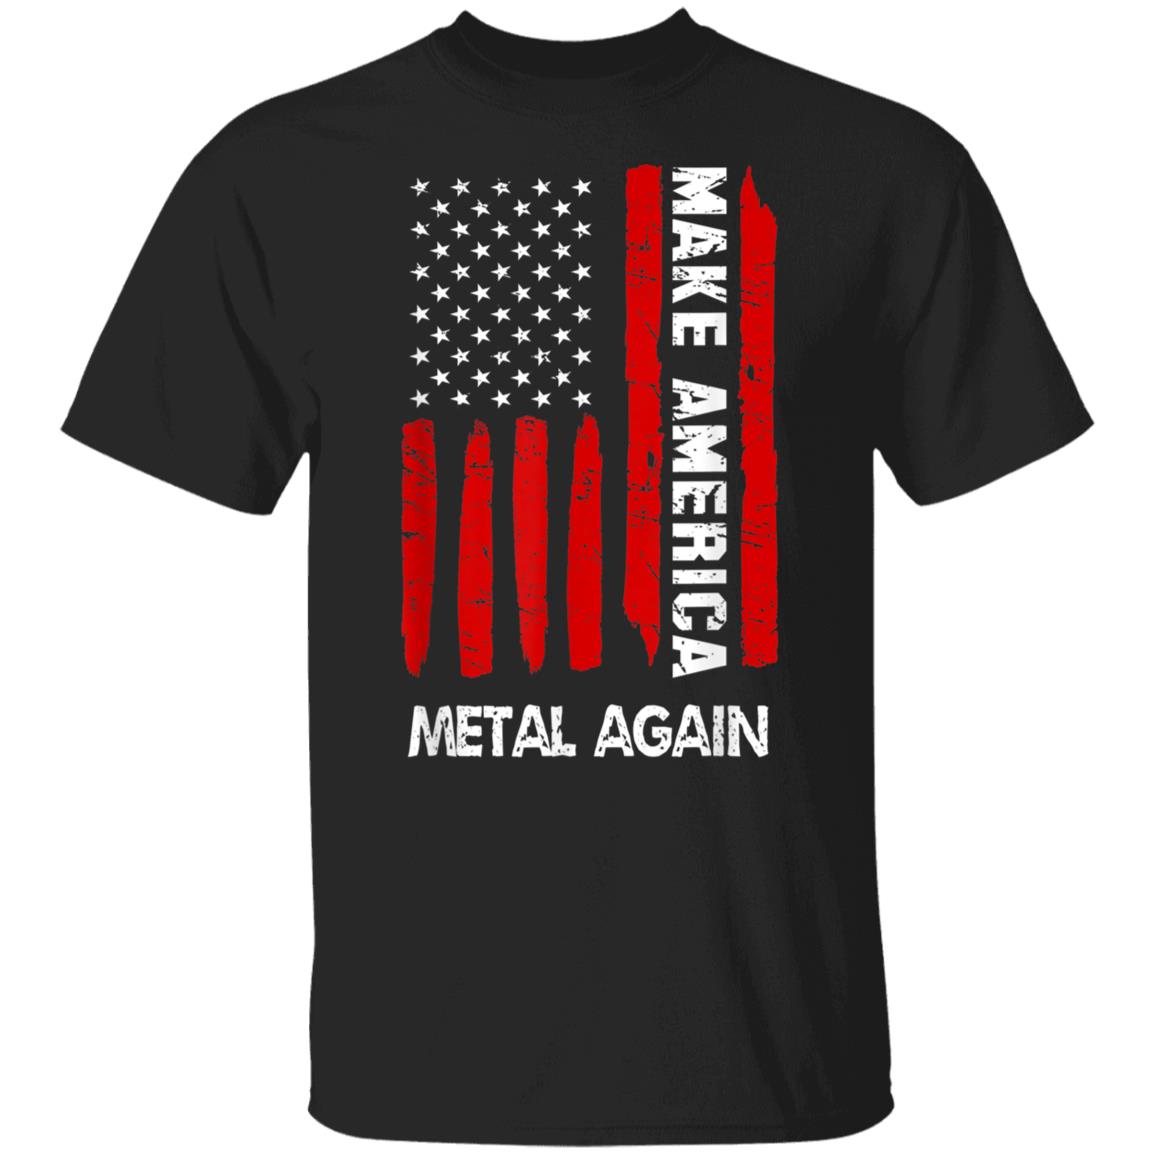 Forth 4th Of July Gift Funny Outfit Make America Metal Again Black T-Shirt